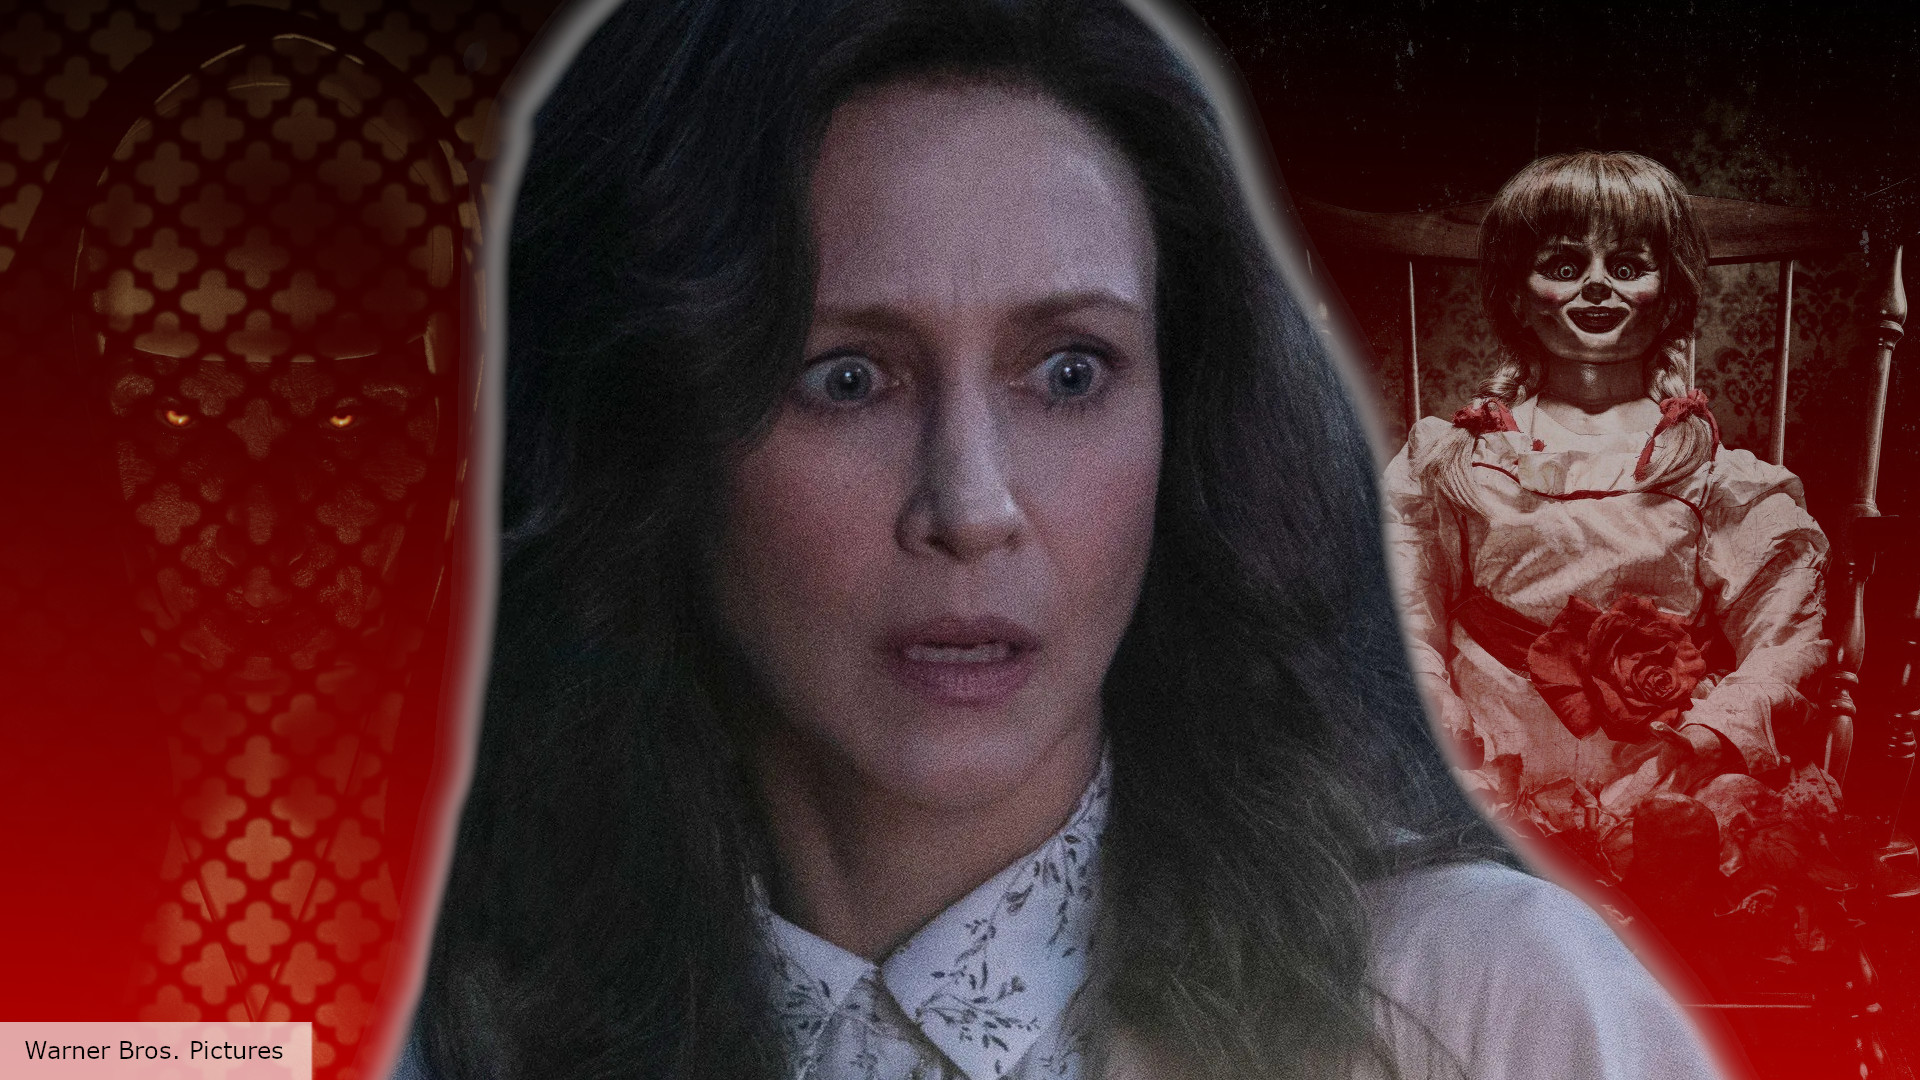 How to watch all The Conjuring movies in order, chronological and more